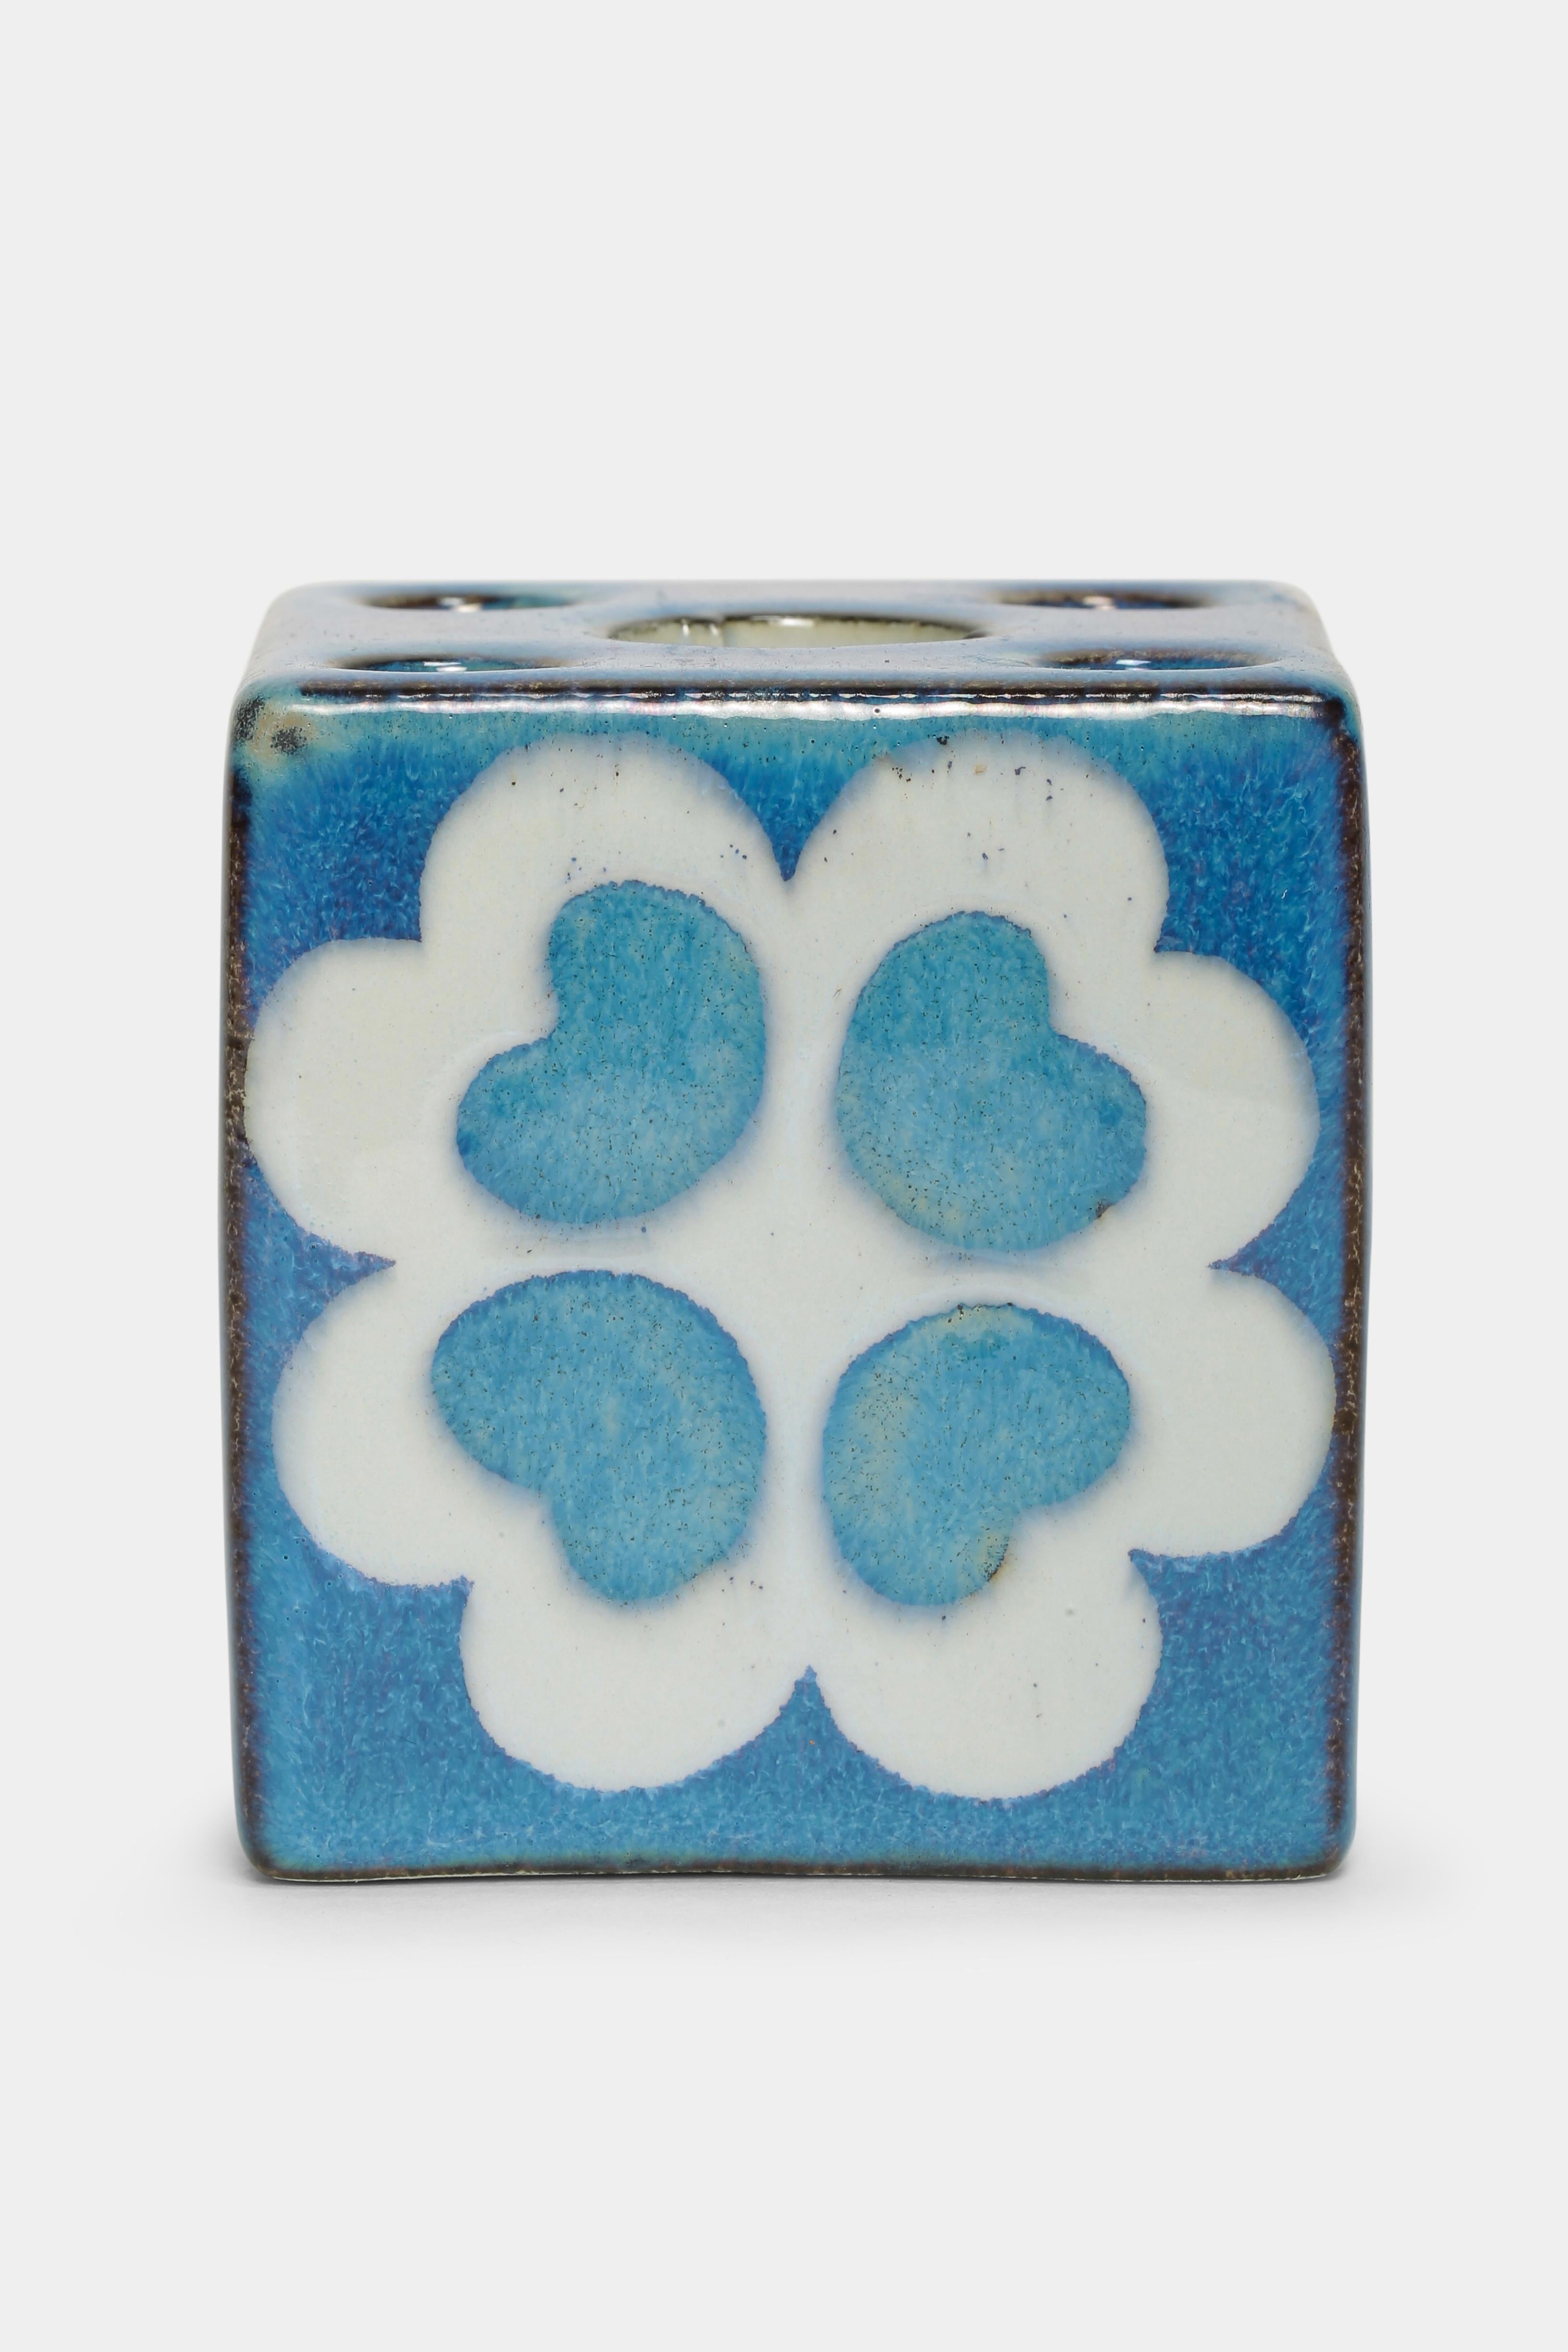 Marianne Johnson candleholder made by Royal Copenhagen in the 1960s in Denmark. Cube painted with a bright blue color. Marked an the bottom with the designer’s initials and numbered 432/3500.